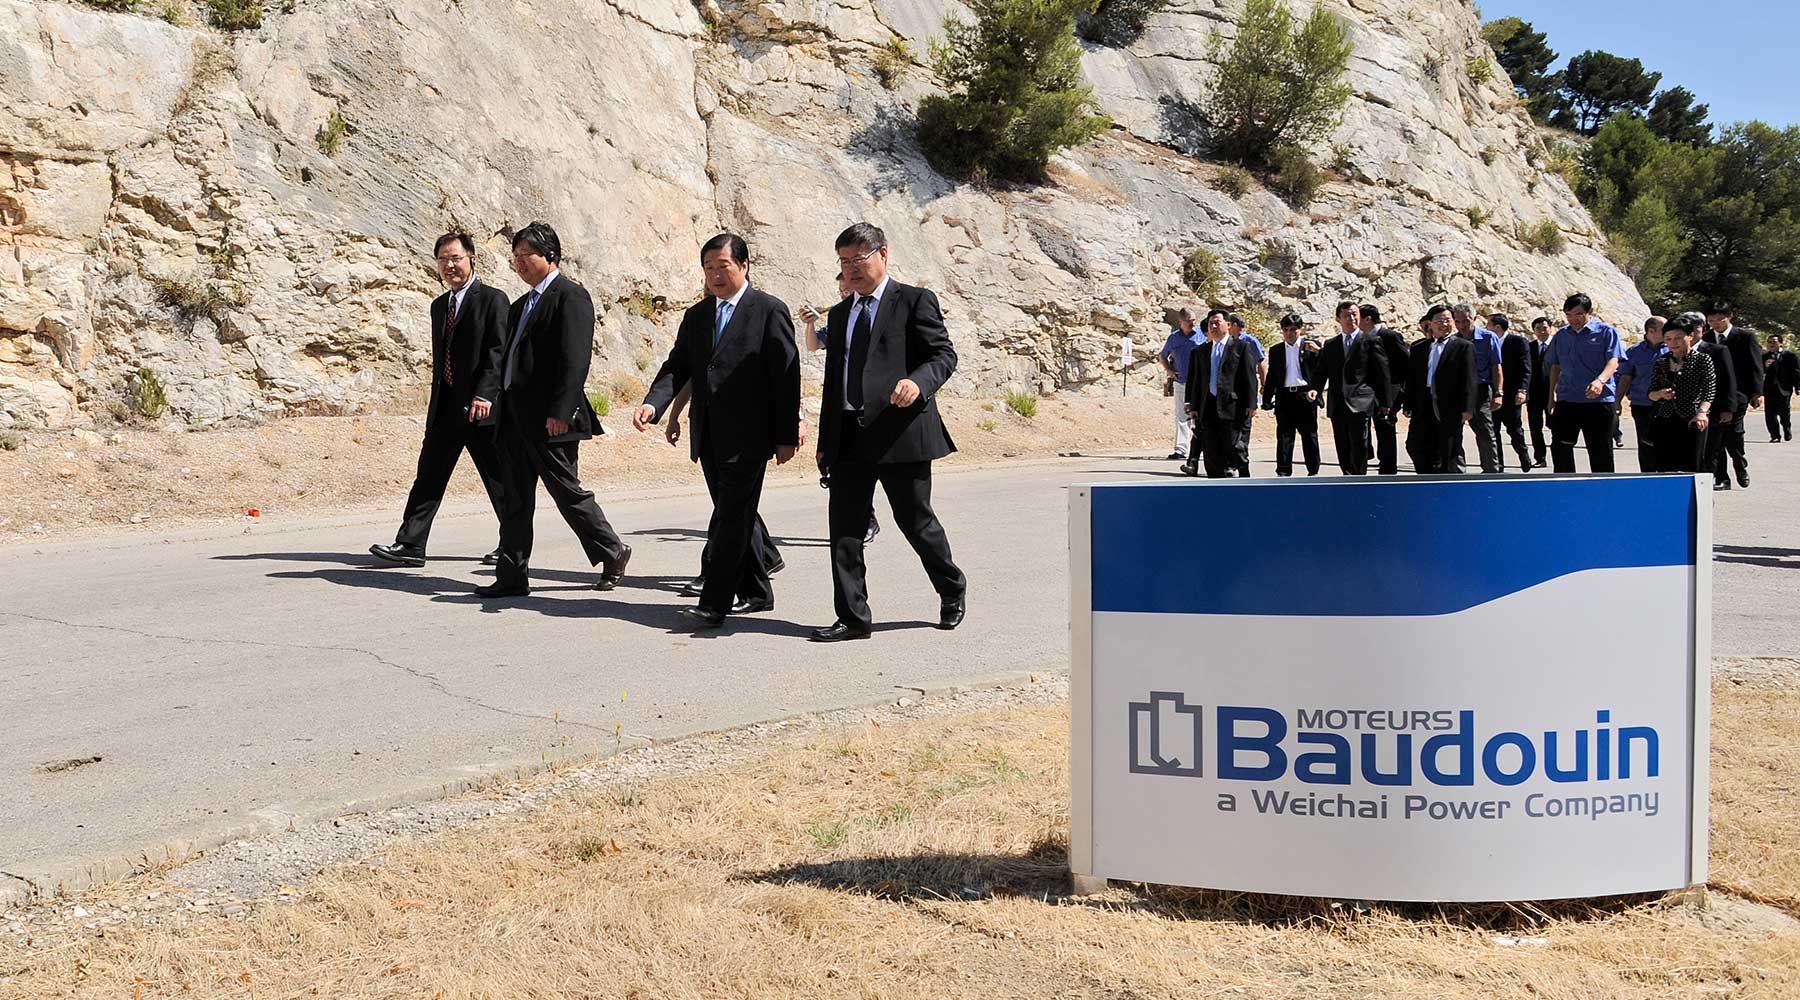 Group of people walking past a Moteurs Baudouin a Weichai Power Company sign.